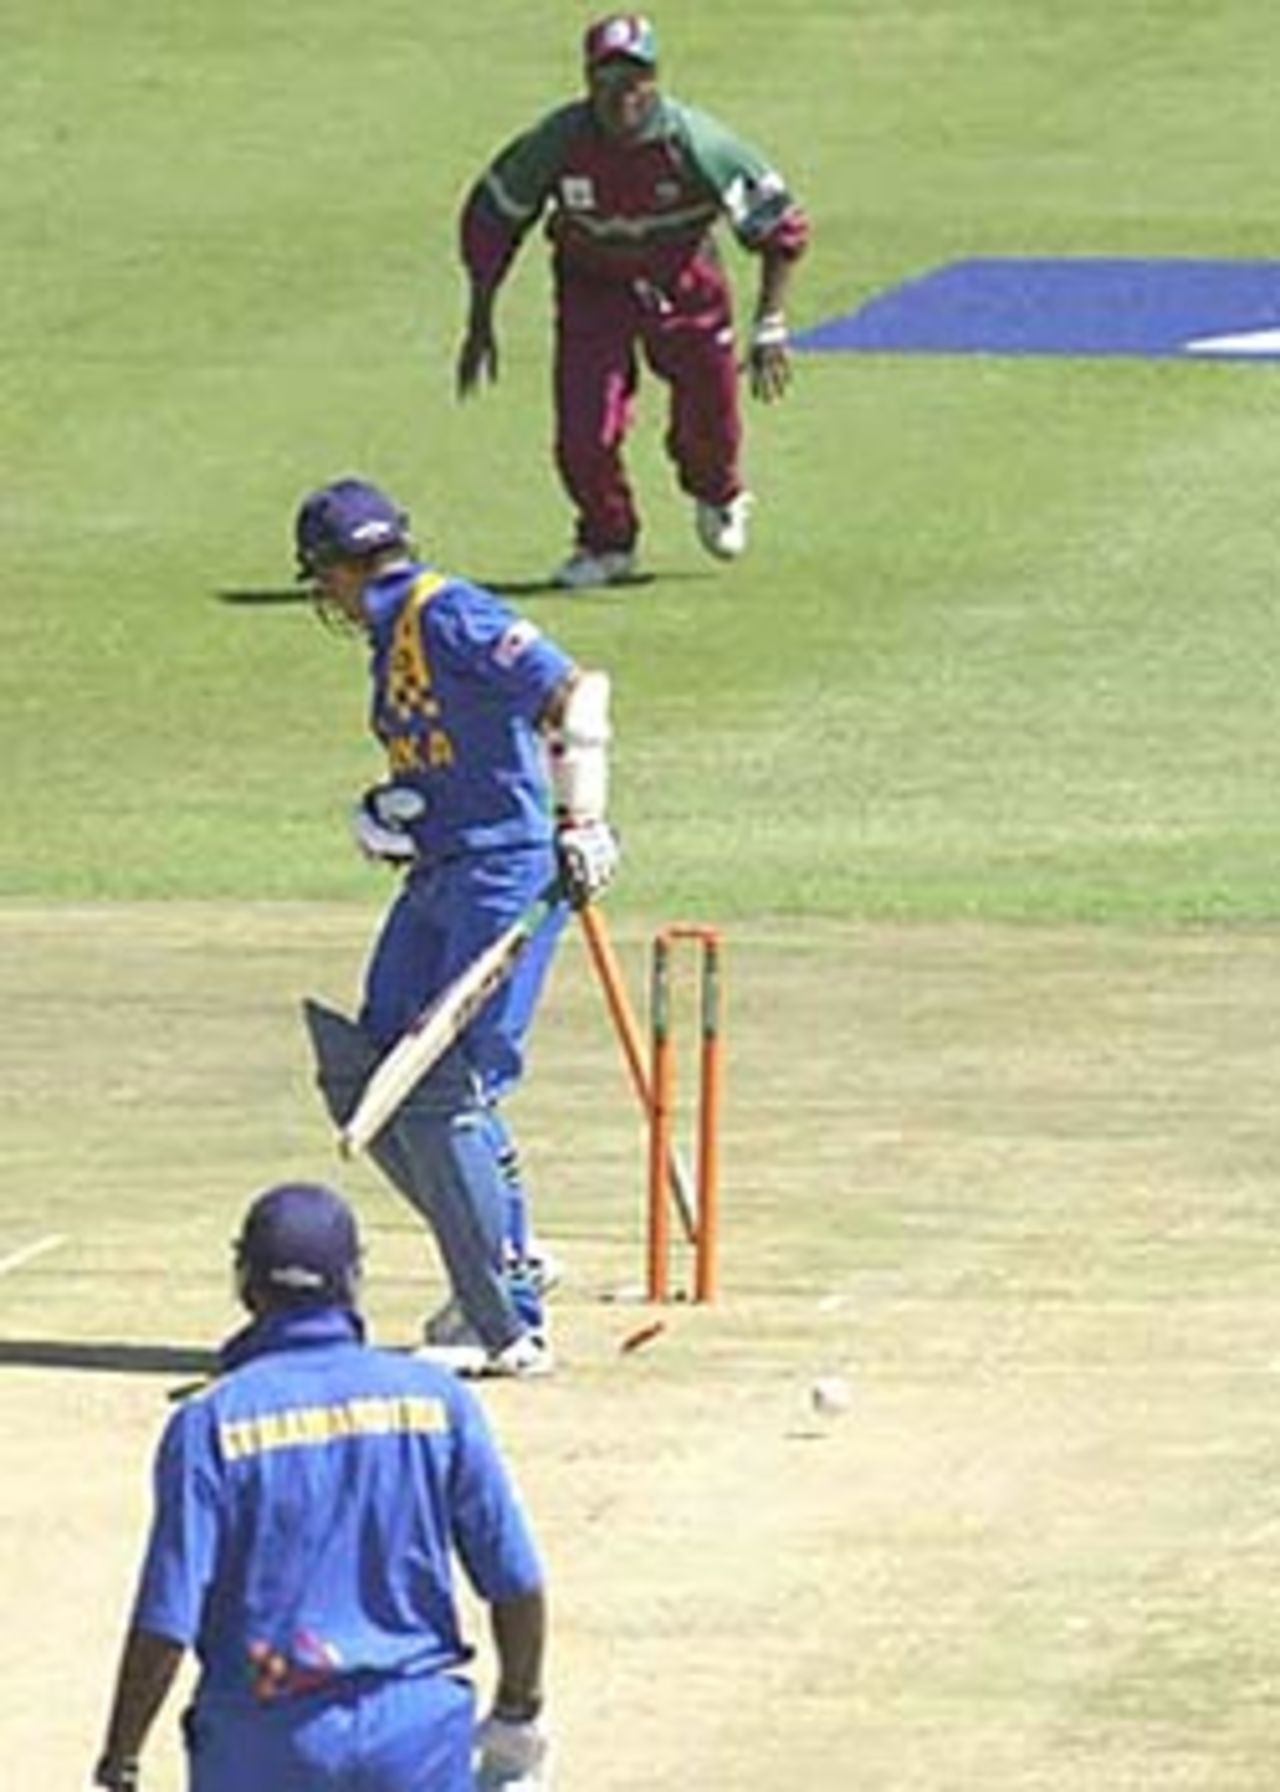 Marvan Atapattu looks back to see his stump uprooted by Dillon, ICC KnockOut, 2000/01, 2nd Preliminary Quarter Final, Sri Lanka v West Indies, Gymkhana Club Ground, Nairobi, 04 October 2000.